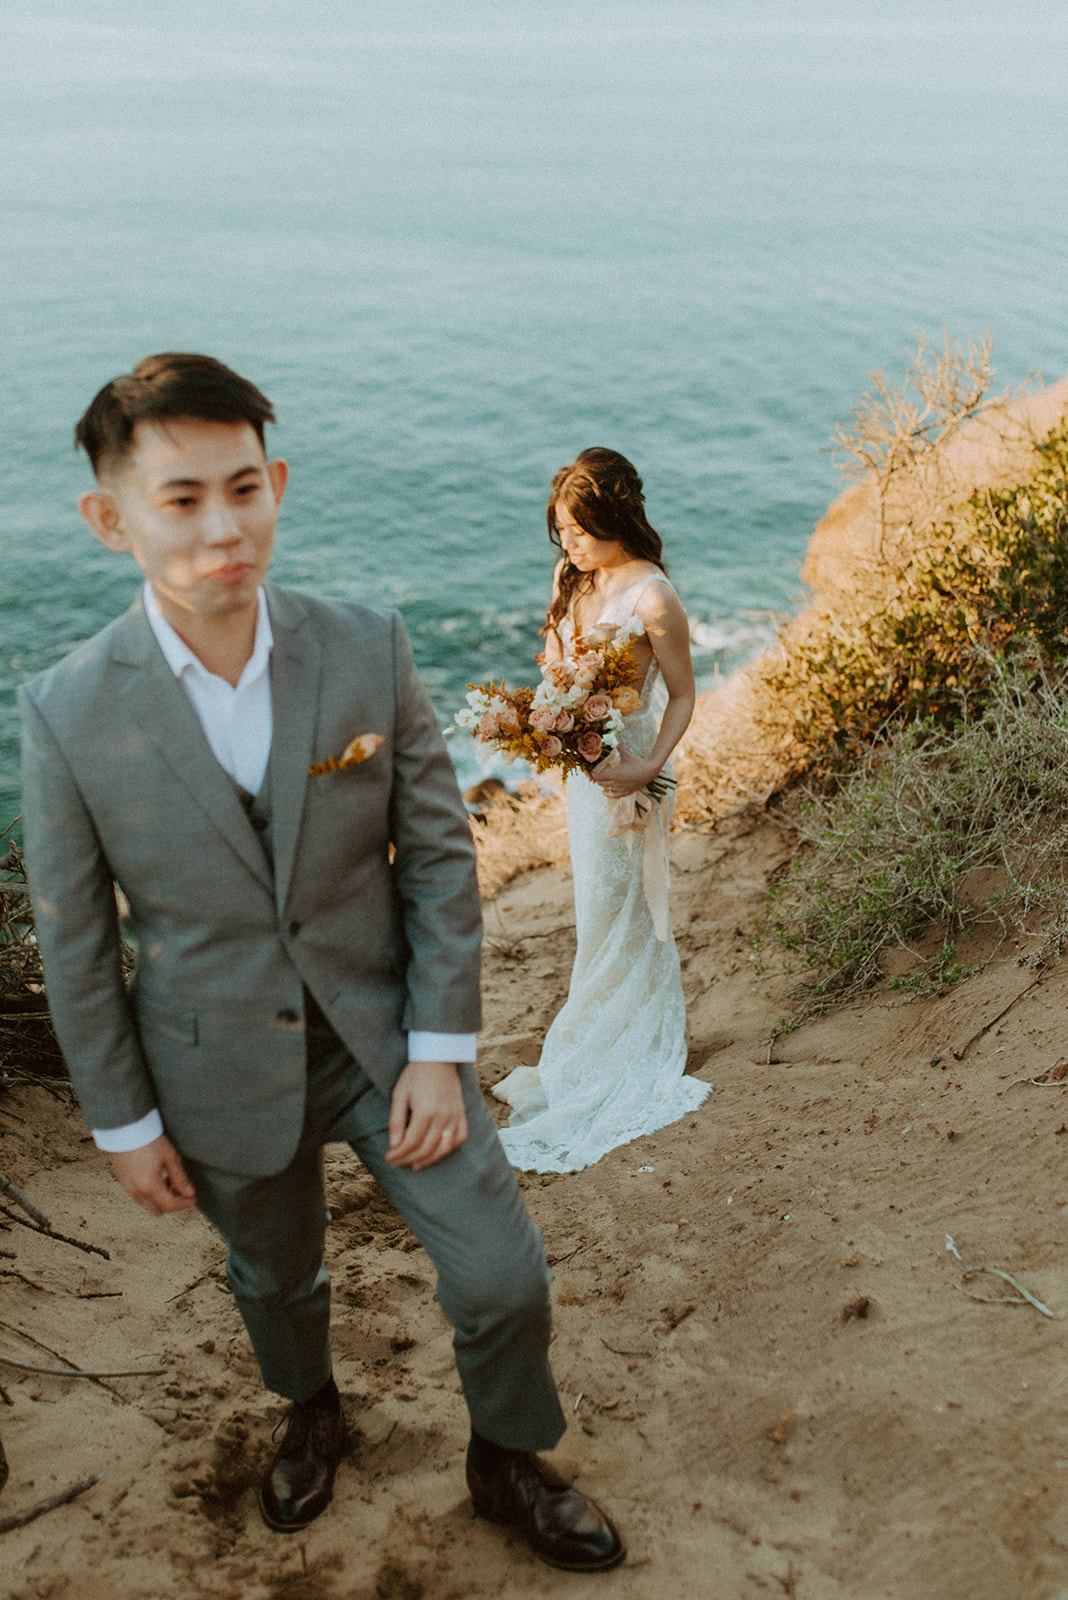 editorial shot of the groom standing in front of the bride who is in focus